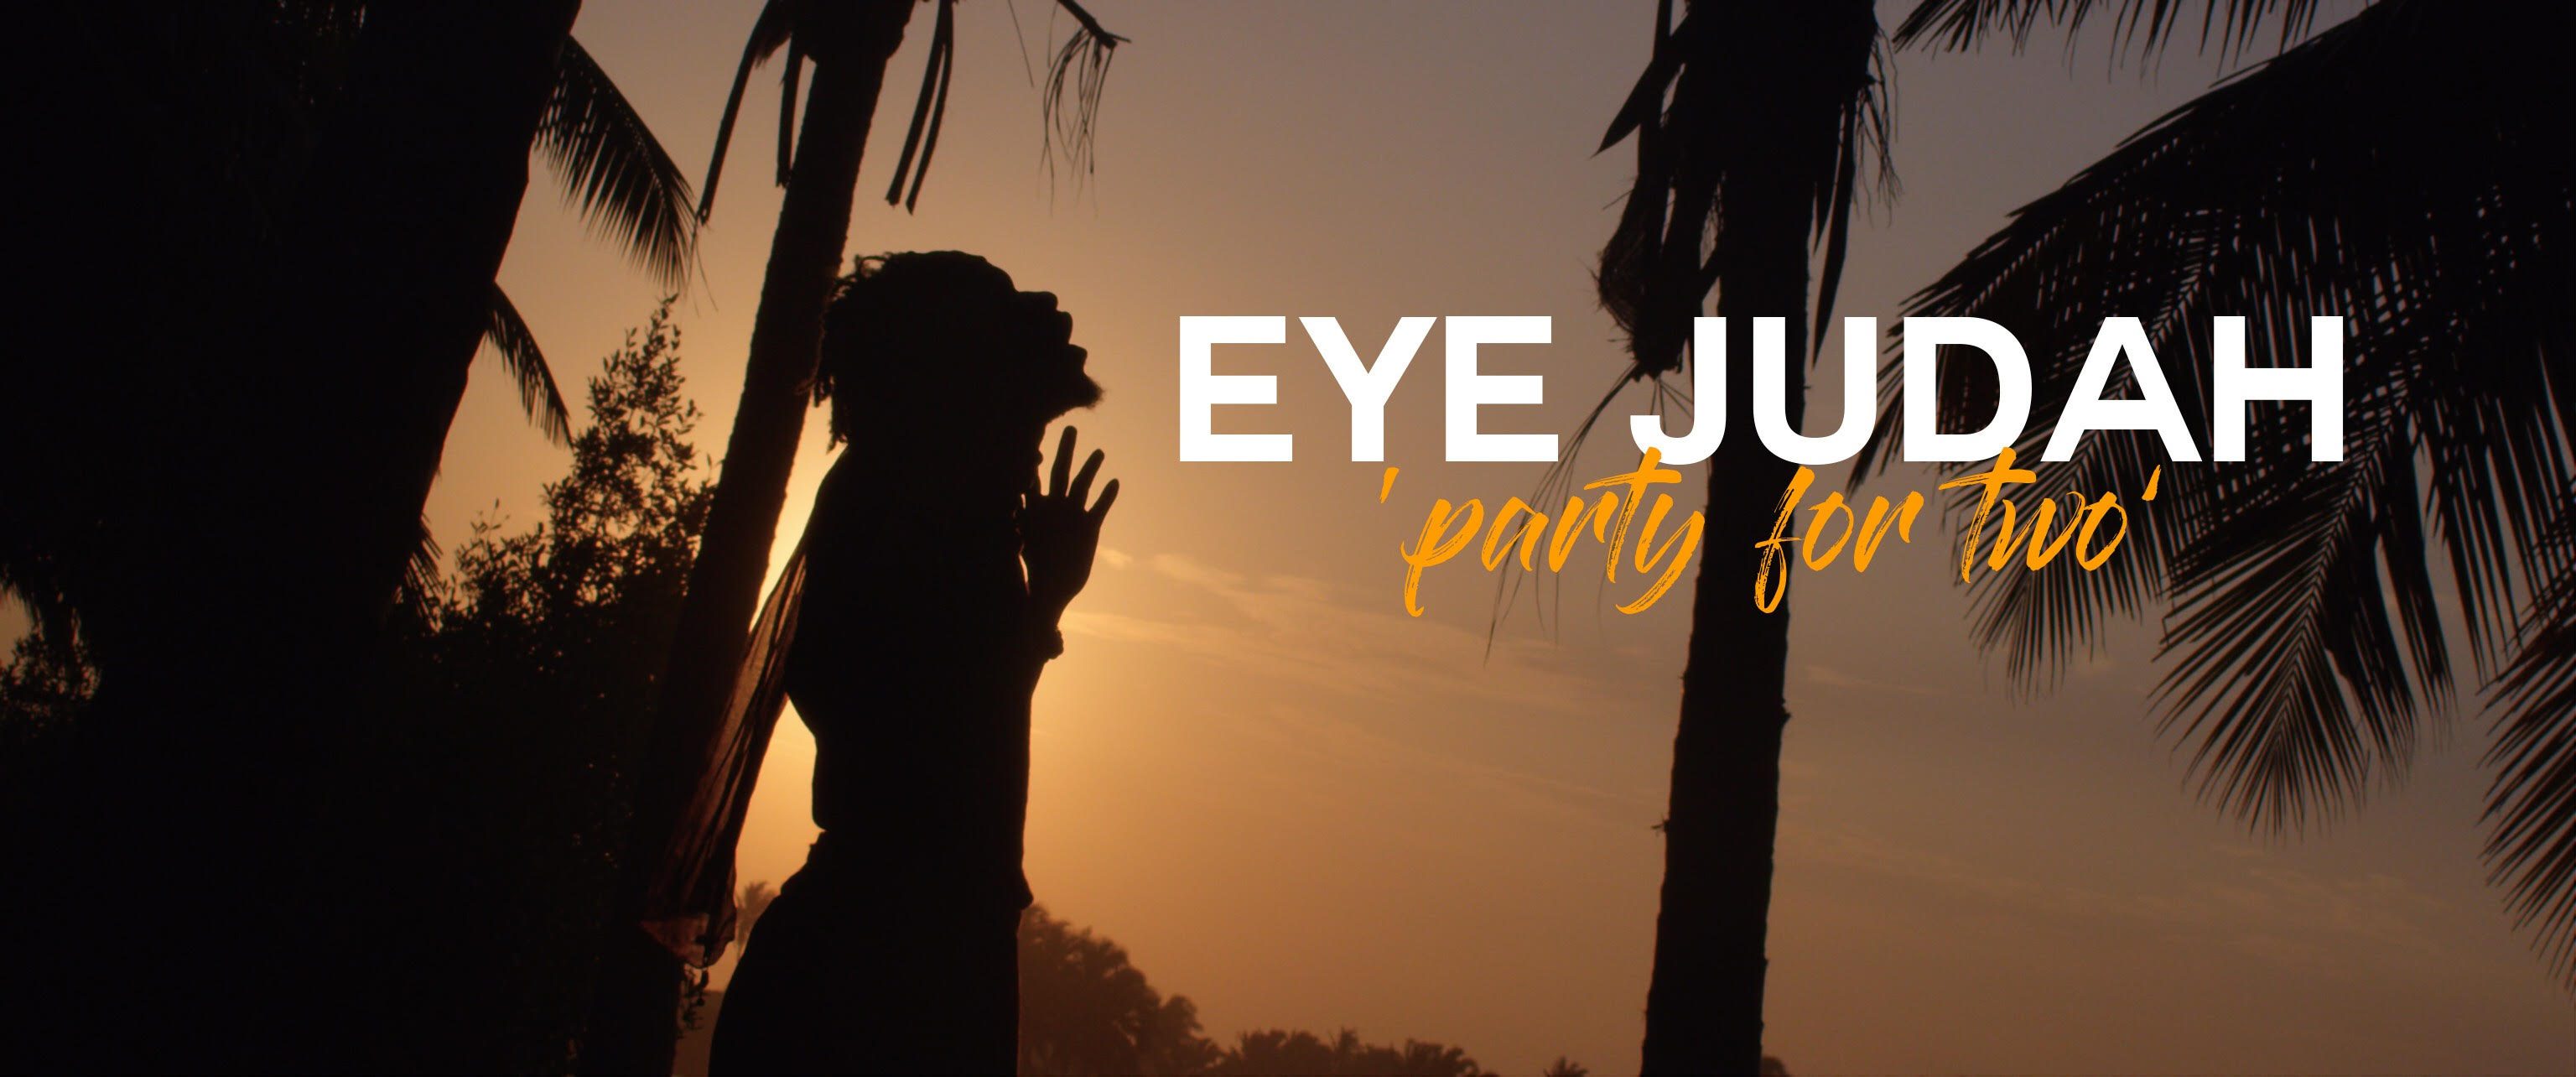 VIDEO: Eye Judah – Party For Two